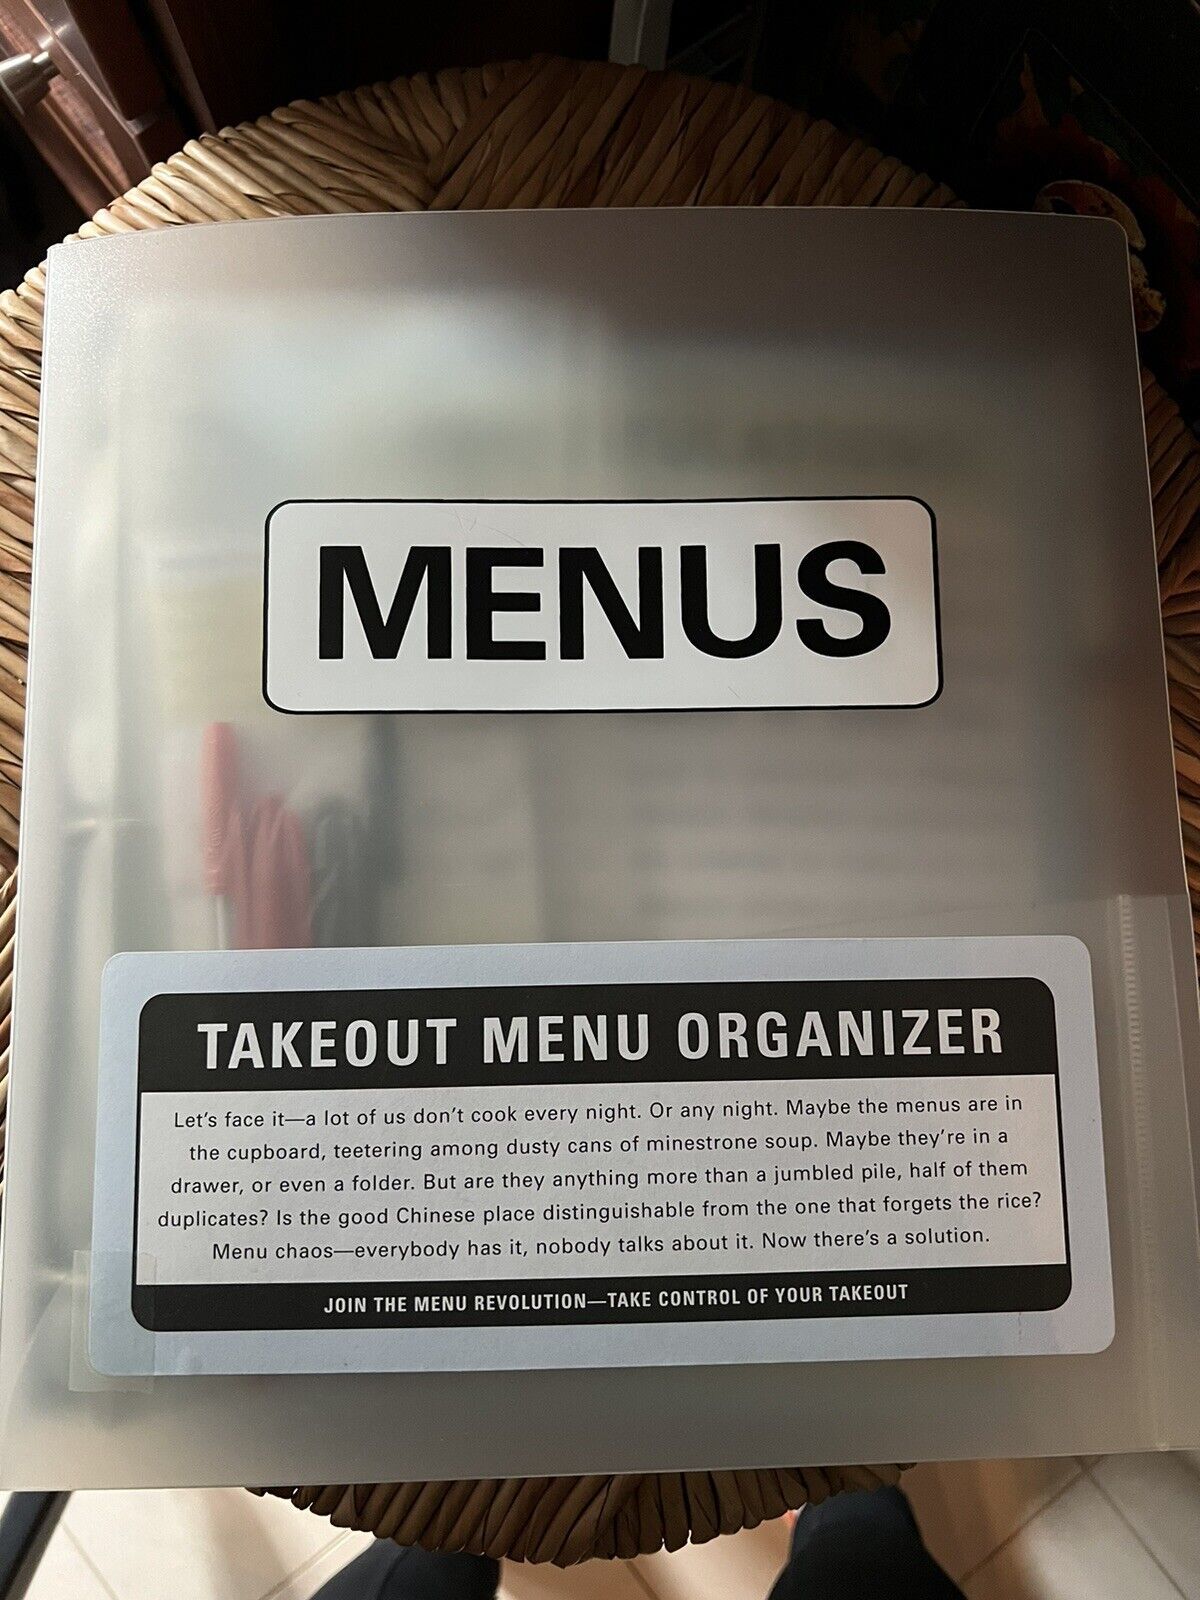 Uncommon Goods Take-Out Menu Organizer with Pens, Pockets and Sleeves for Menus - $19.99